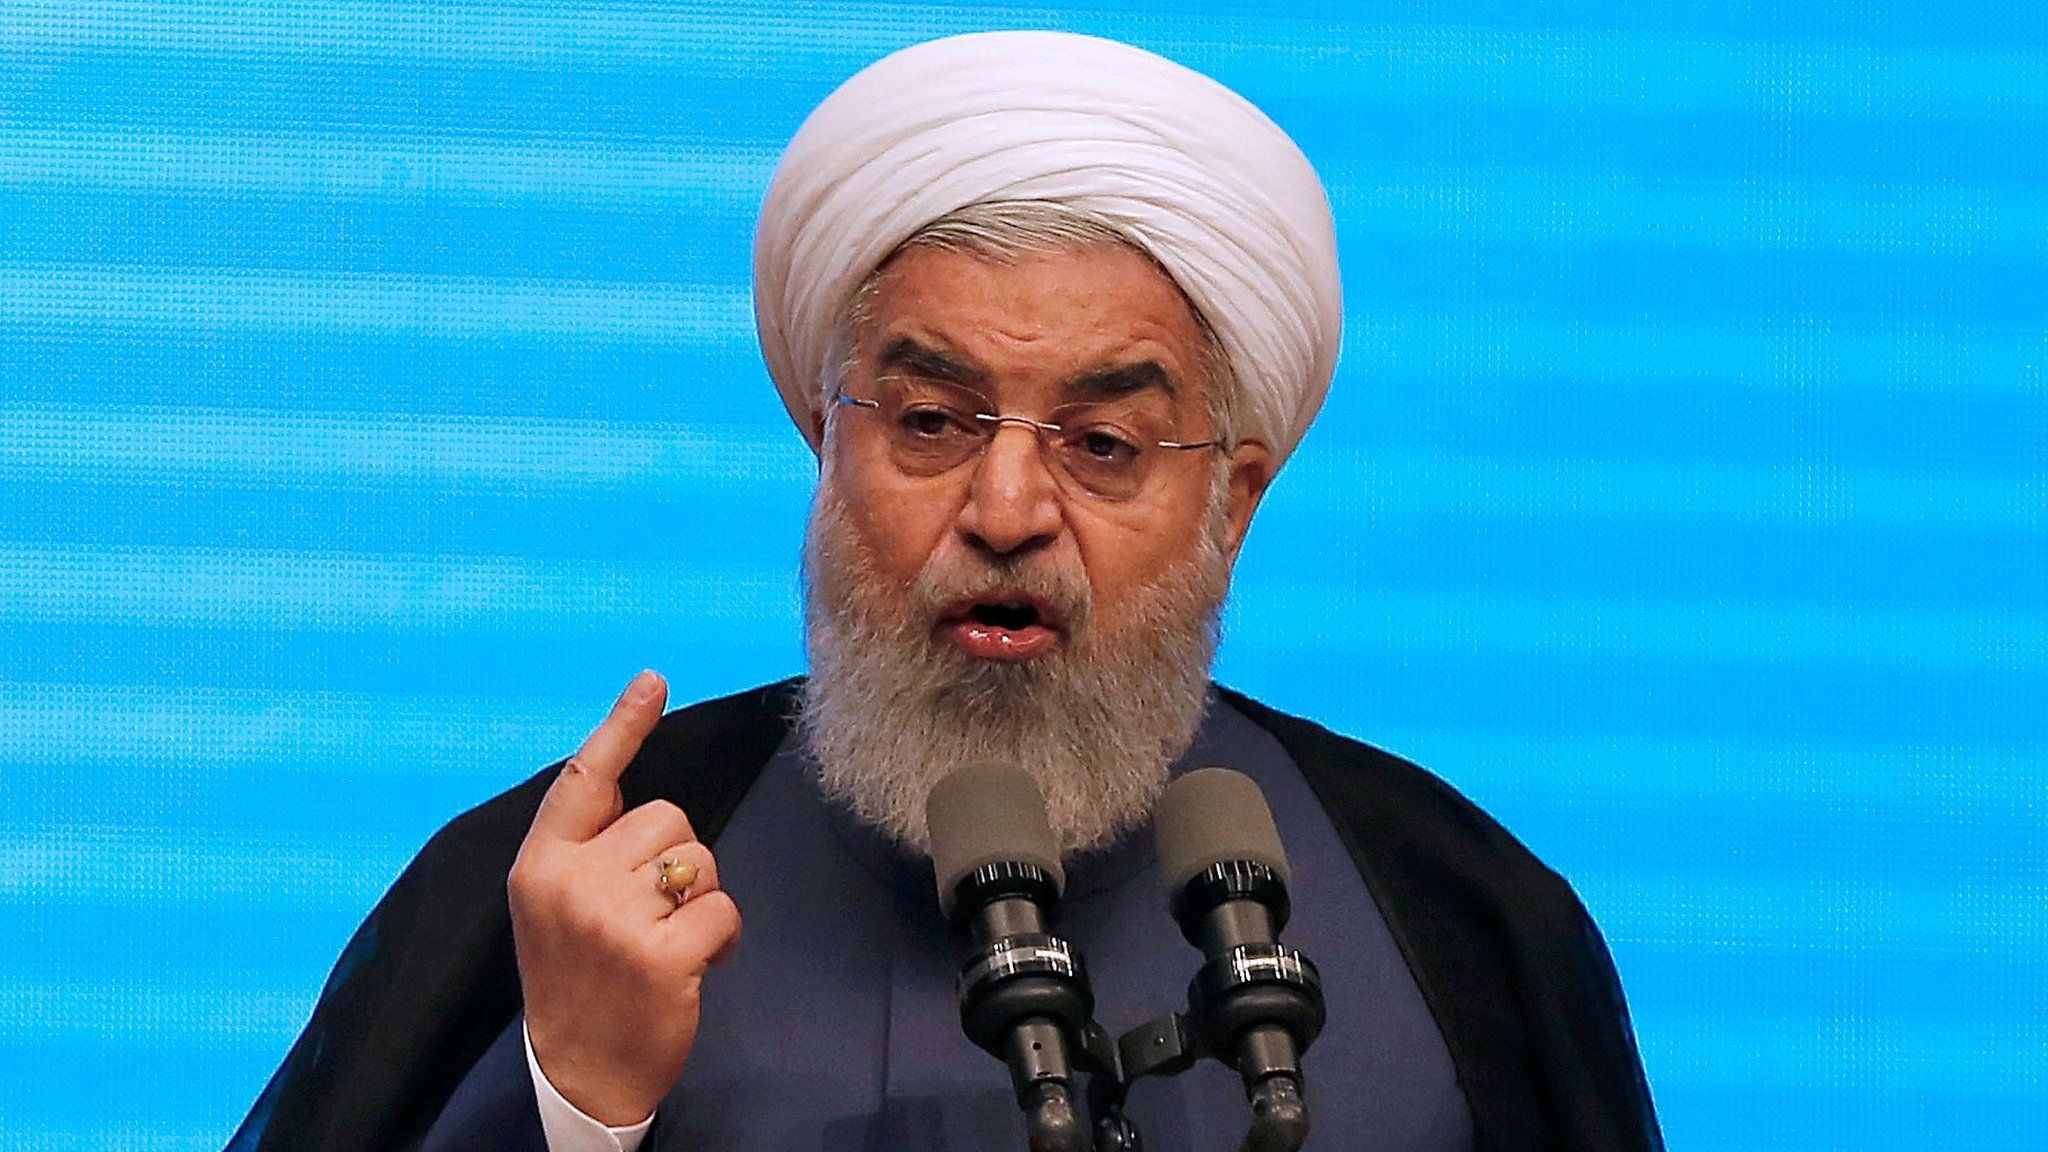 Iranian President Hassan Rouhani gives a speech in the city of Tabriz (25 April 2018)